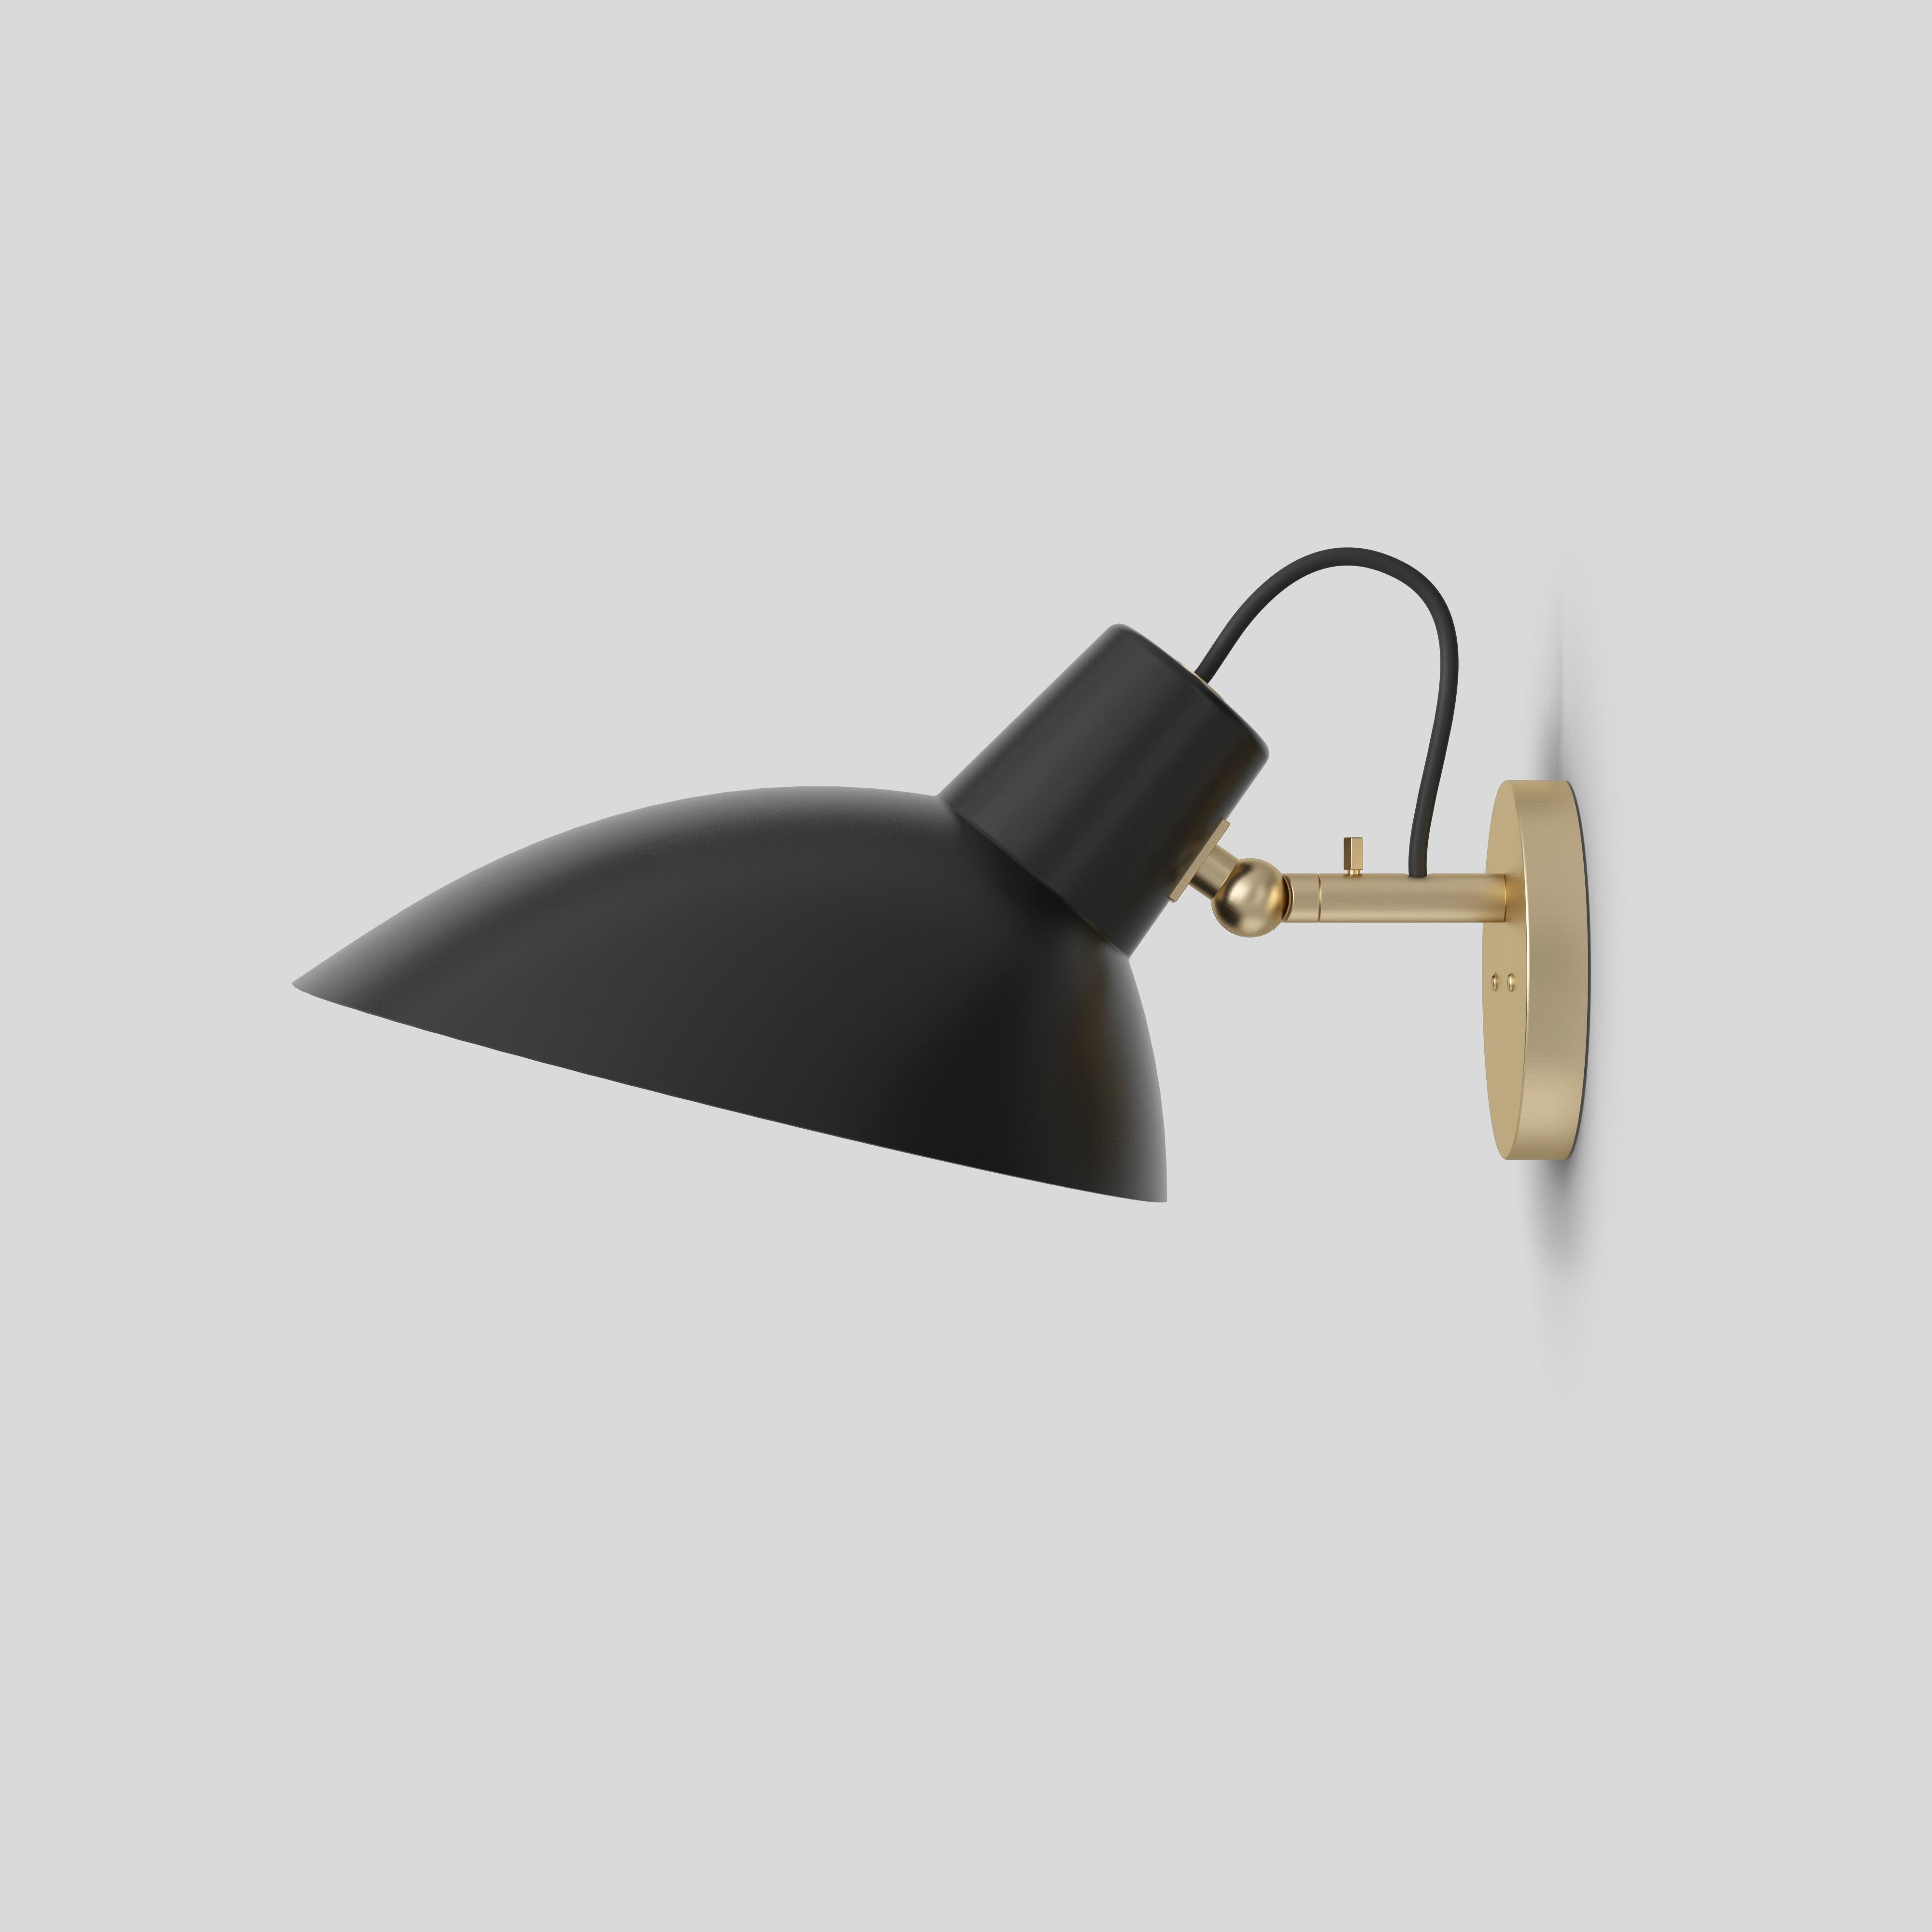 VV Cinquanta wall
Design by Vittoriano Viganò
This version is with black lacquered reflector and brass mount.

The VV Cinquanta features an elegant and versatile posable direct light source that can swivel and tilt. The wall model is mounted on a